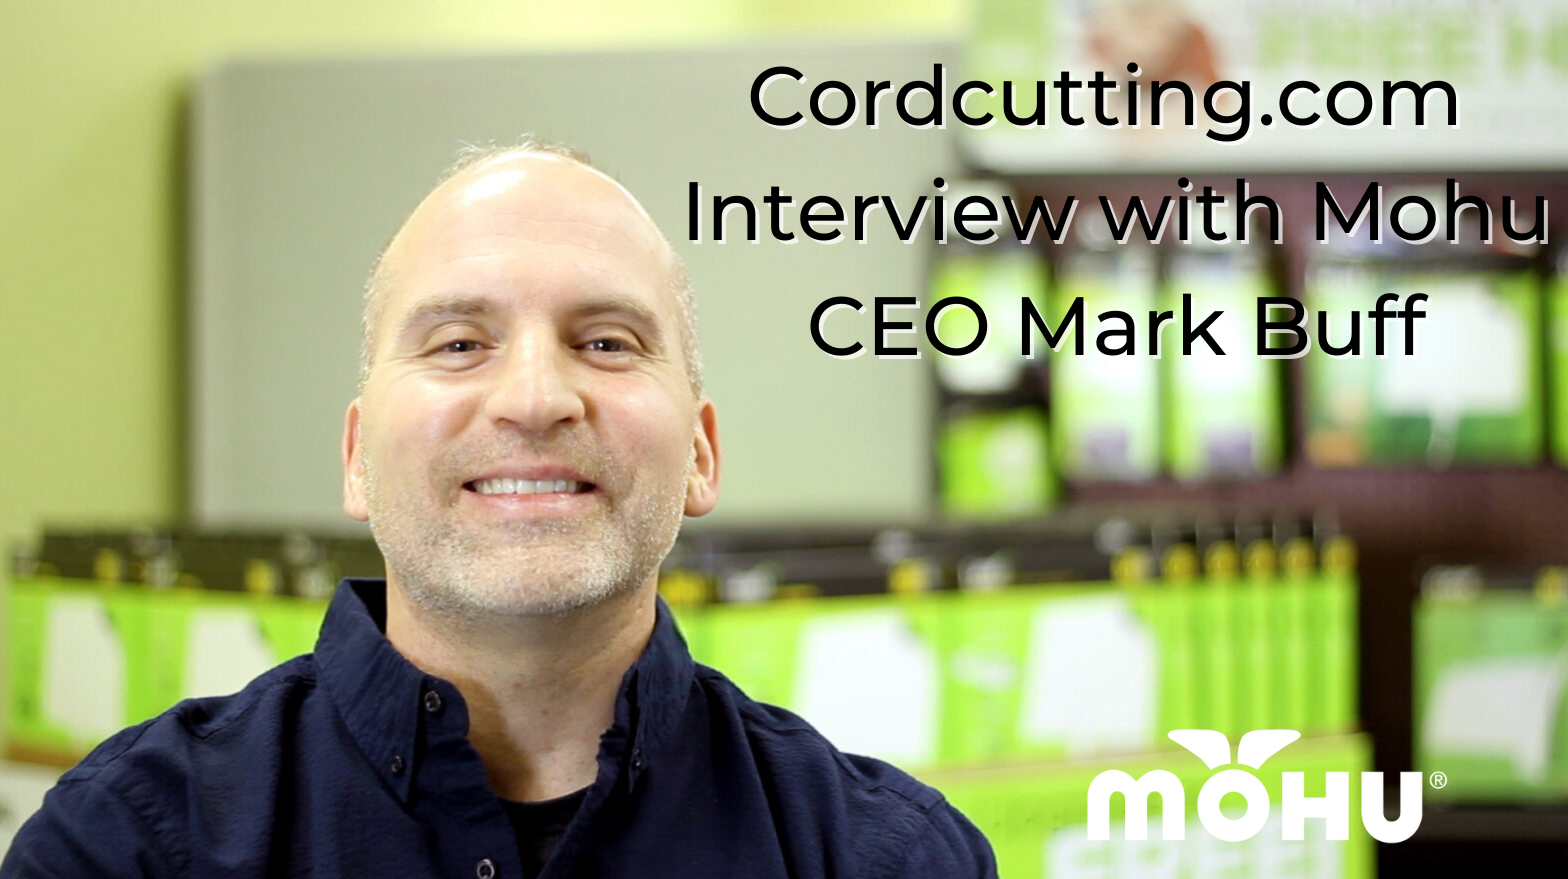 Photo of Mohu CEO Mark Buff, Cordcutting.com Interview with Mohu CEO Mark Buff